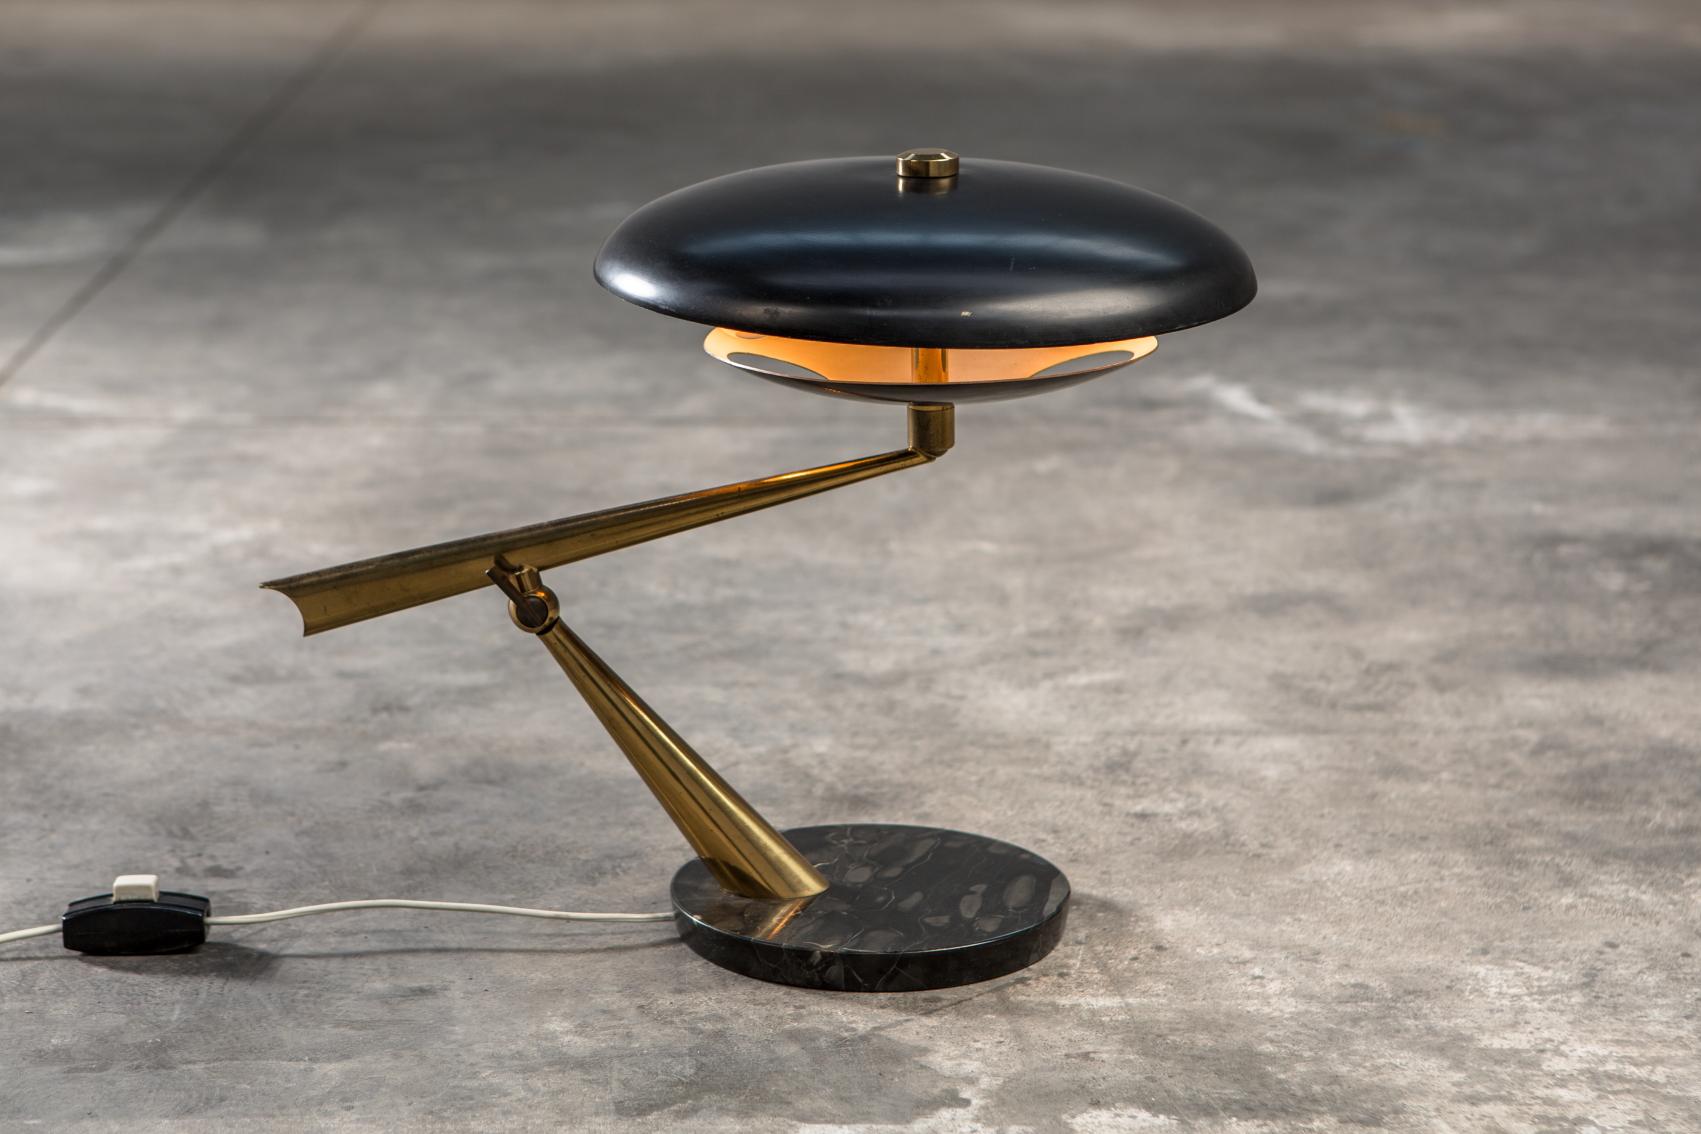 A rare desk/table lamp made by Lumen in Italy in the 1950s. Black marble base, brass frame and varnished aluminium. In good working vintage condition. H: 45 cm
Ships worldwide.